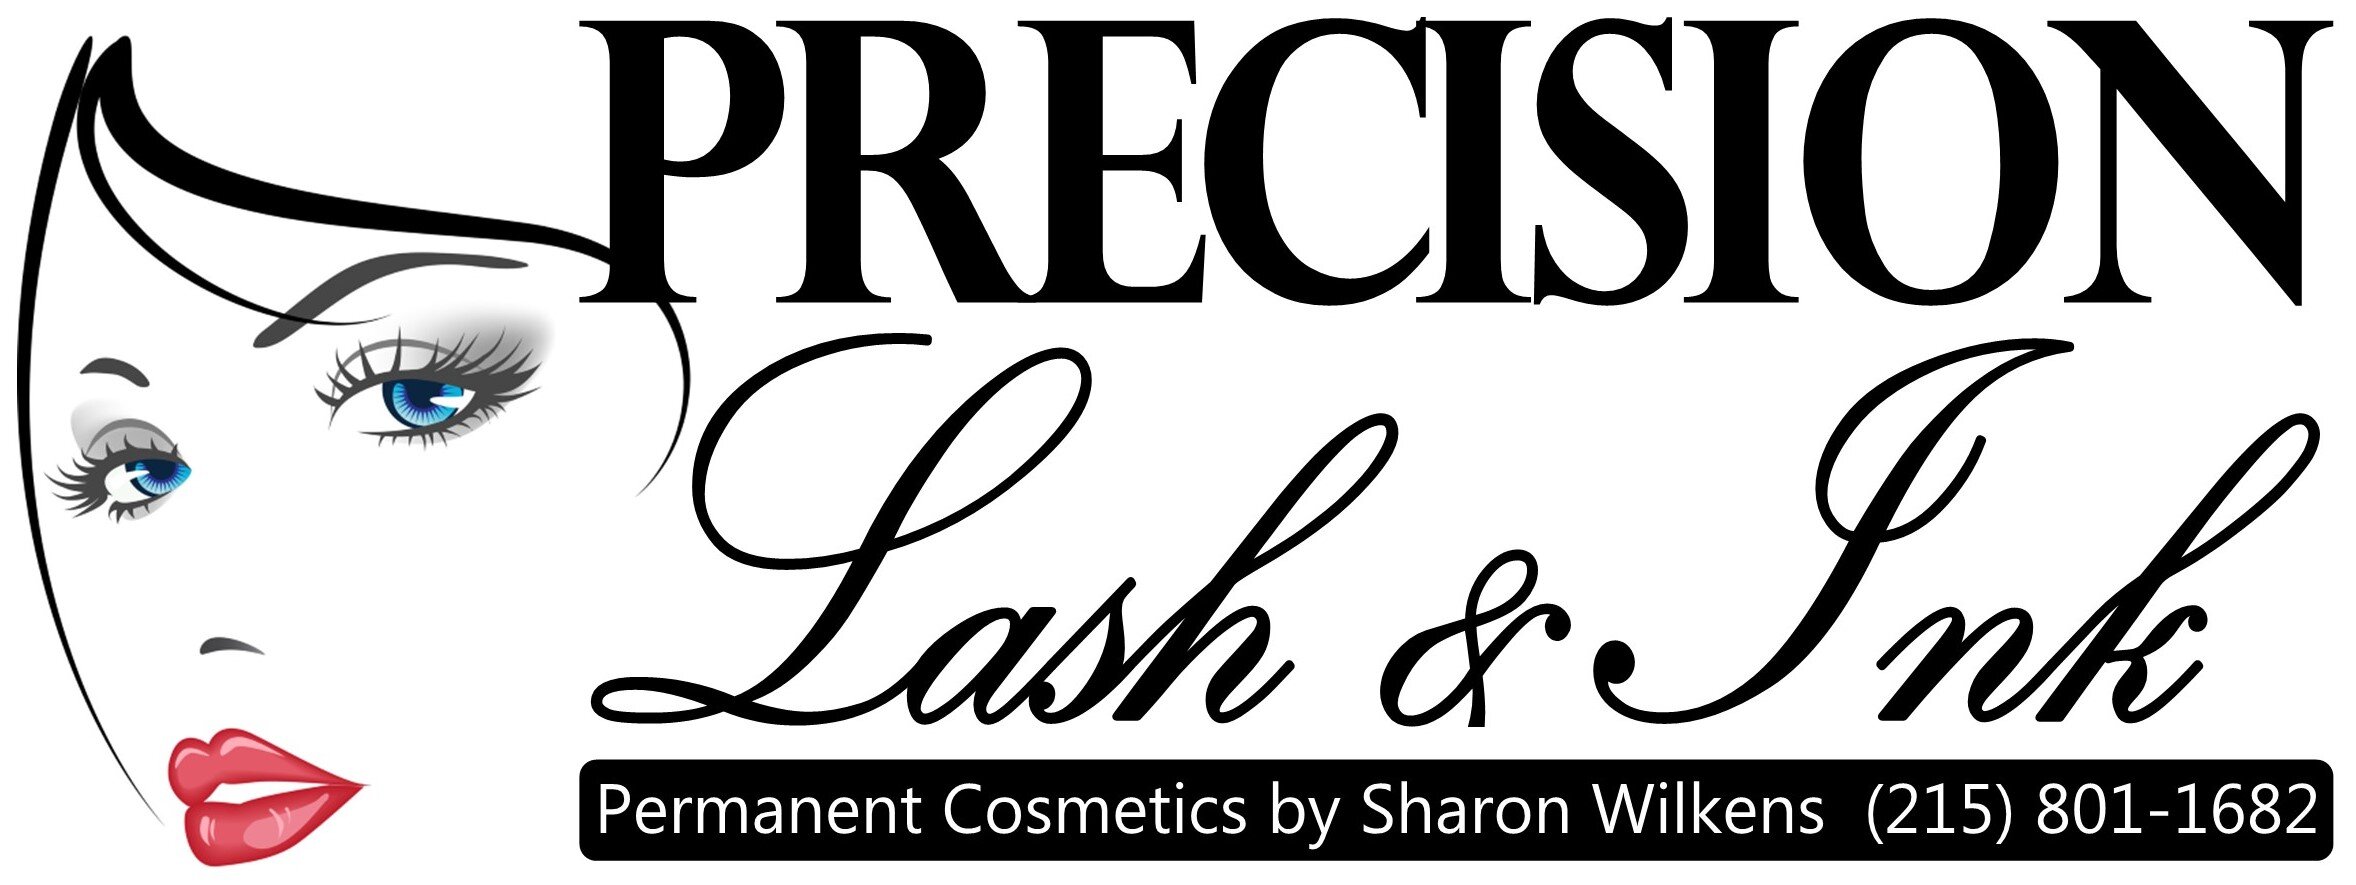 Precision Lash &amp; Ink - Permanent Cosmetics by Sharon Wilkens  (215) 801-1682